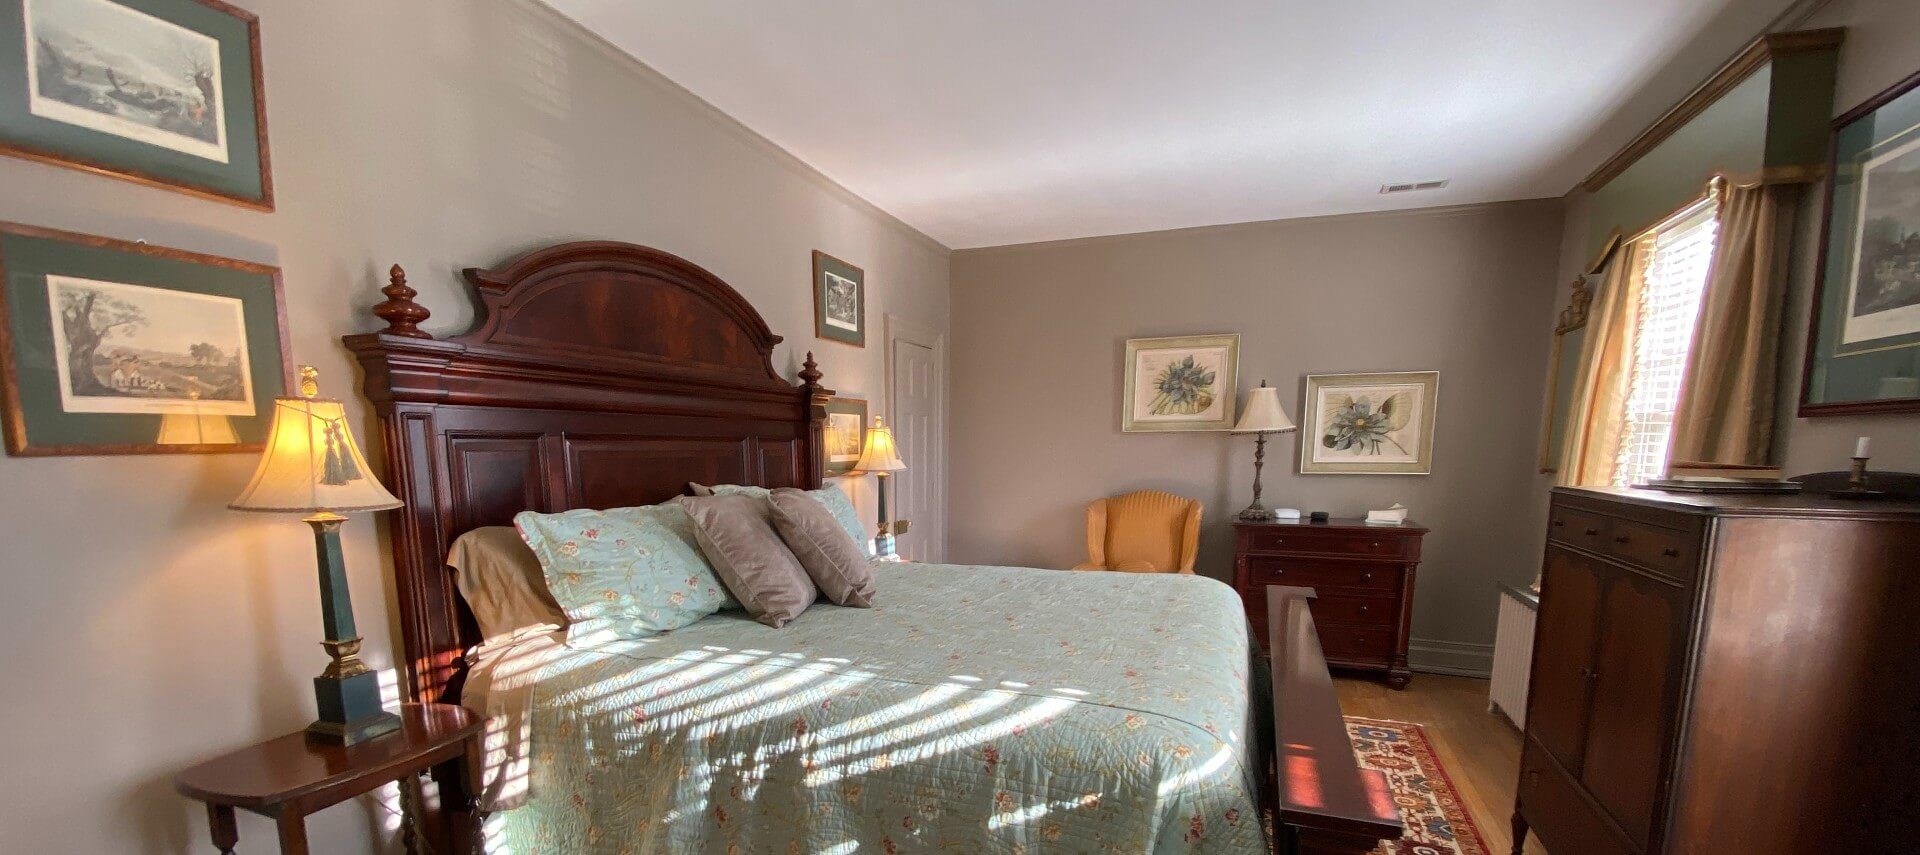 Spacious and elegant bedroom with a king bed, mahogany headboard, two dressers, chair and art work on the walls